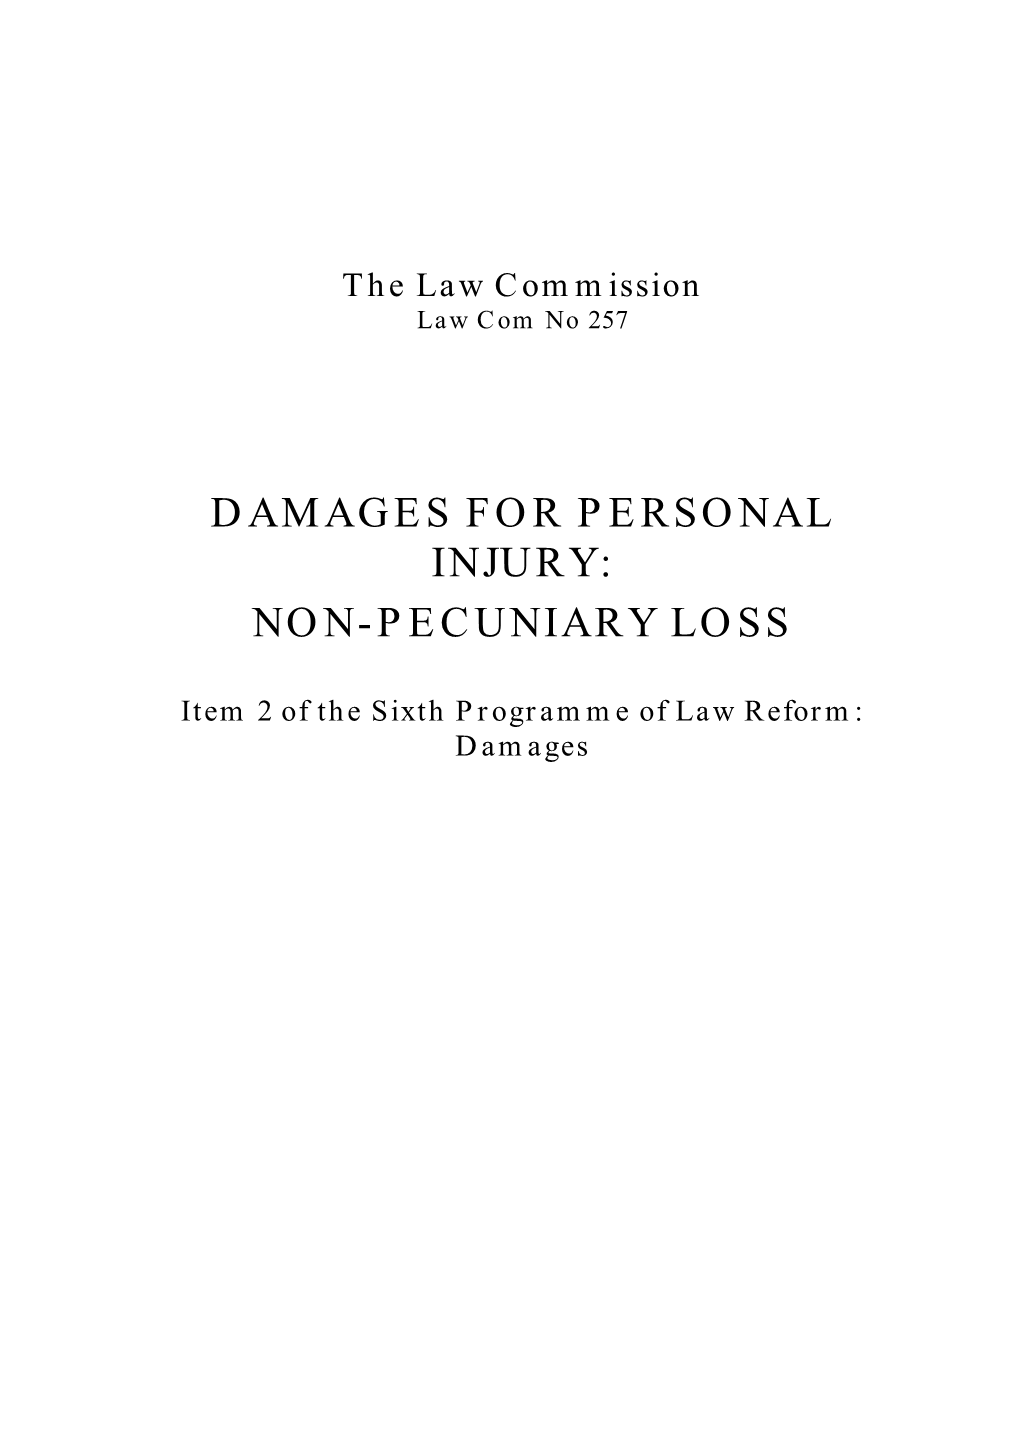 Damages for Personal Injury: Non-Pecuniary Loss